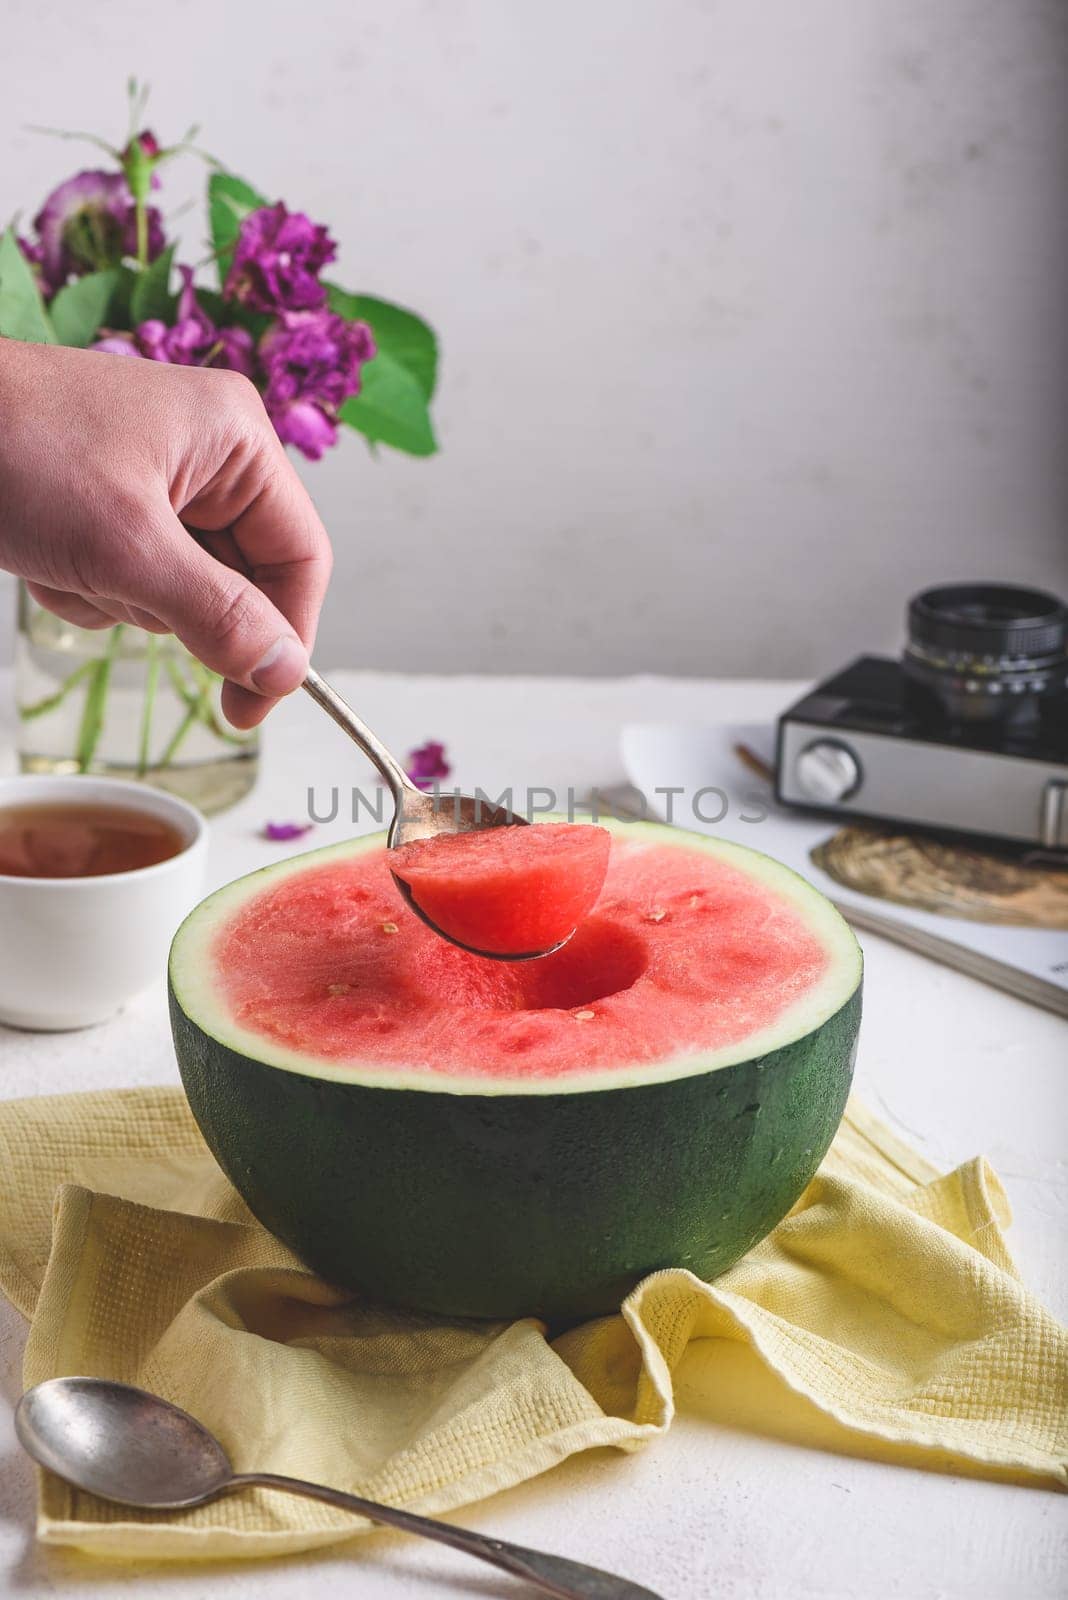 The Spoon with Piece of Watermelon in Man Hand